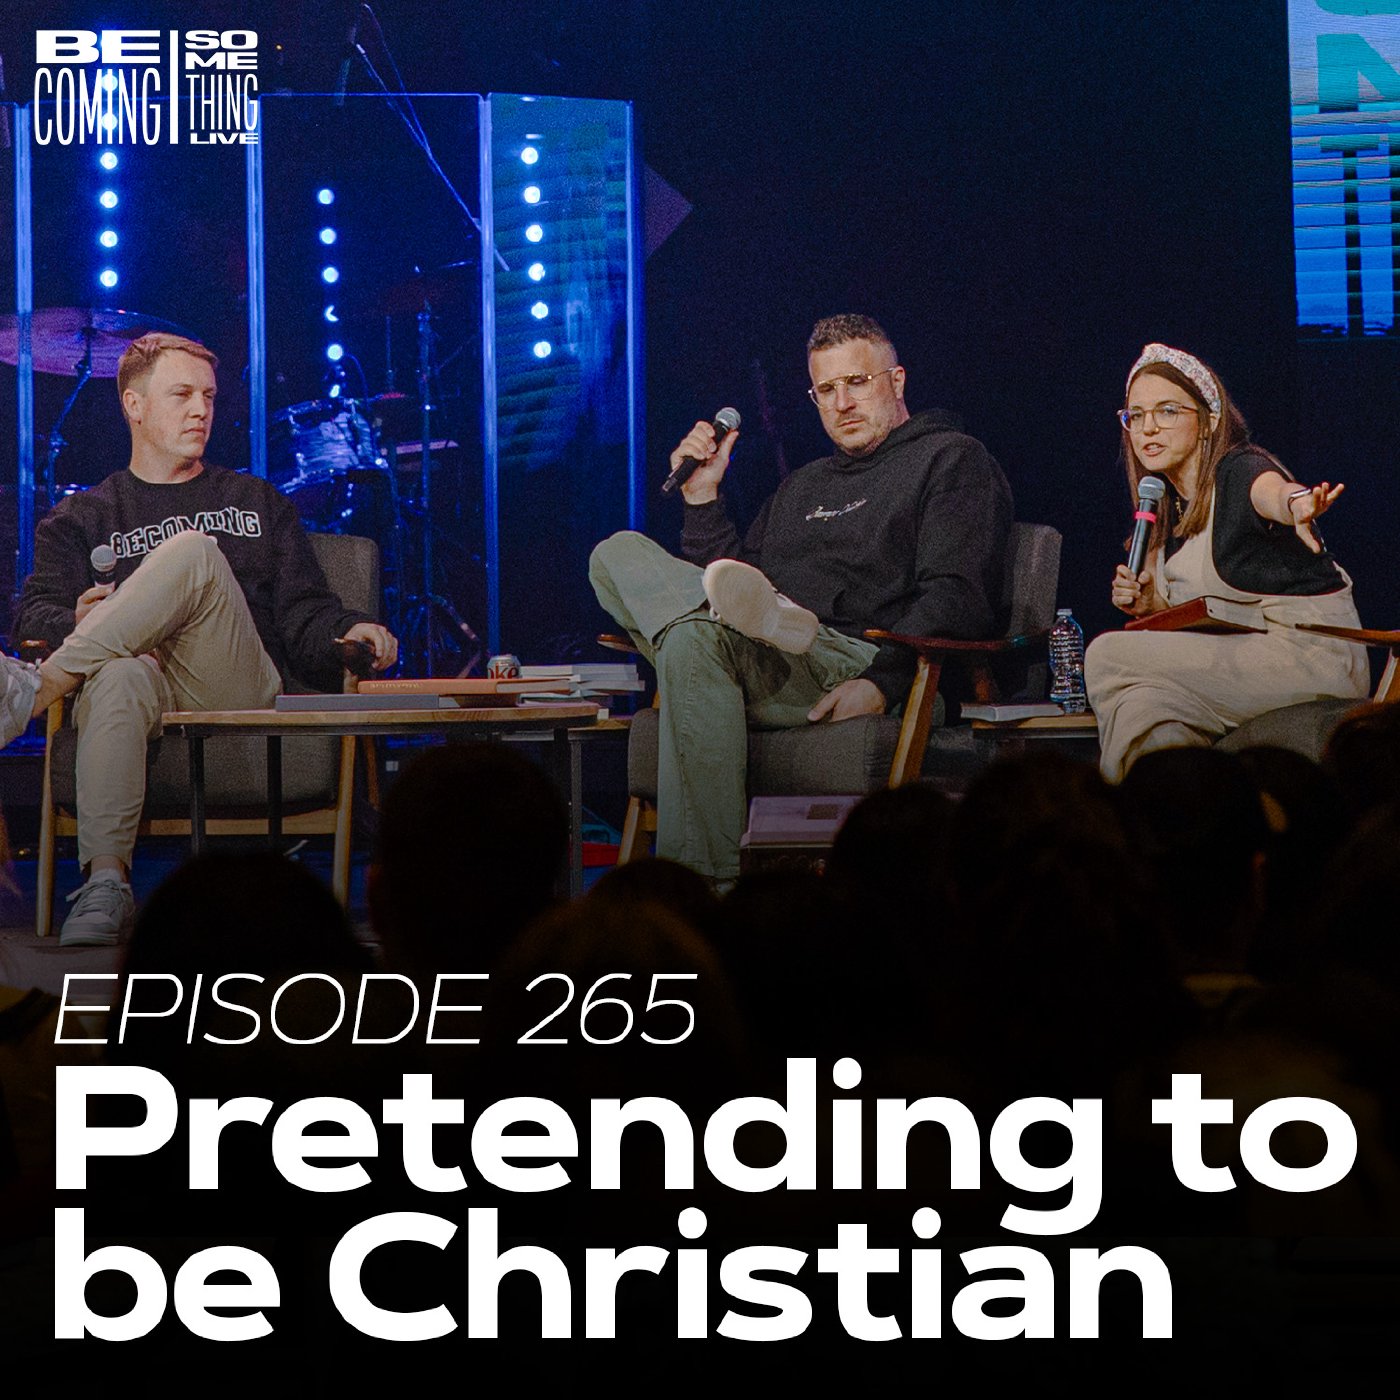 Episode 265: Pretending to be Christian (from BeSo Live)